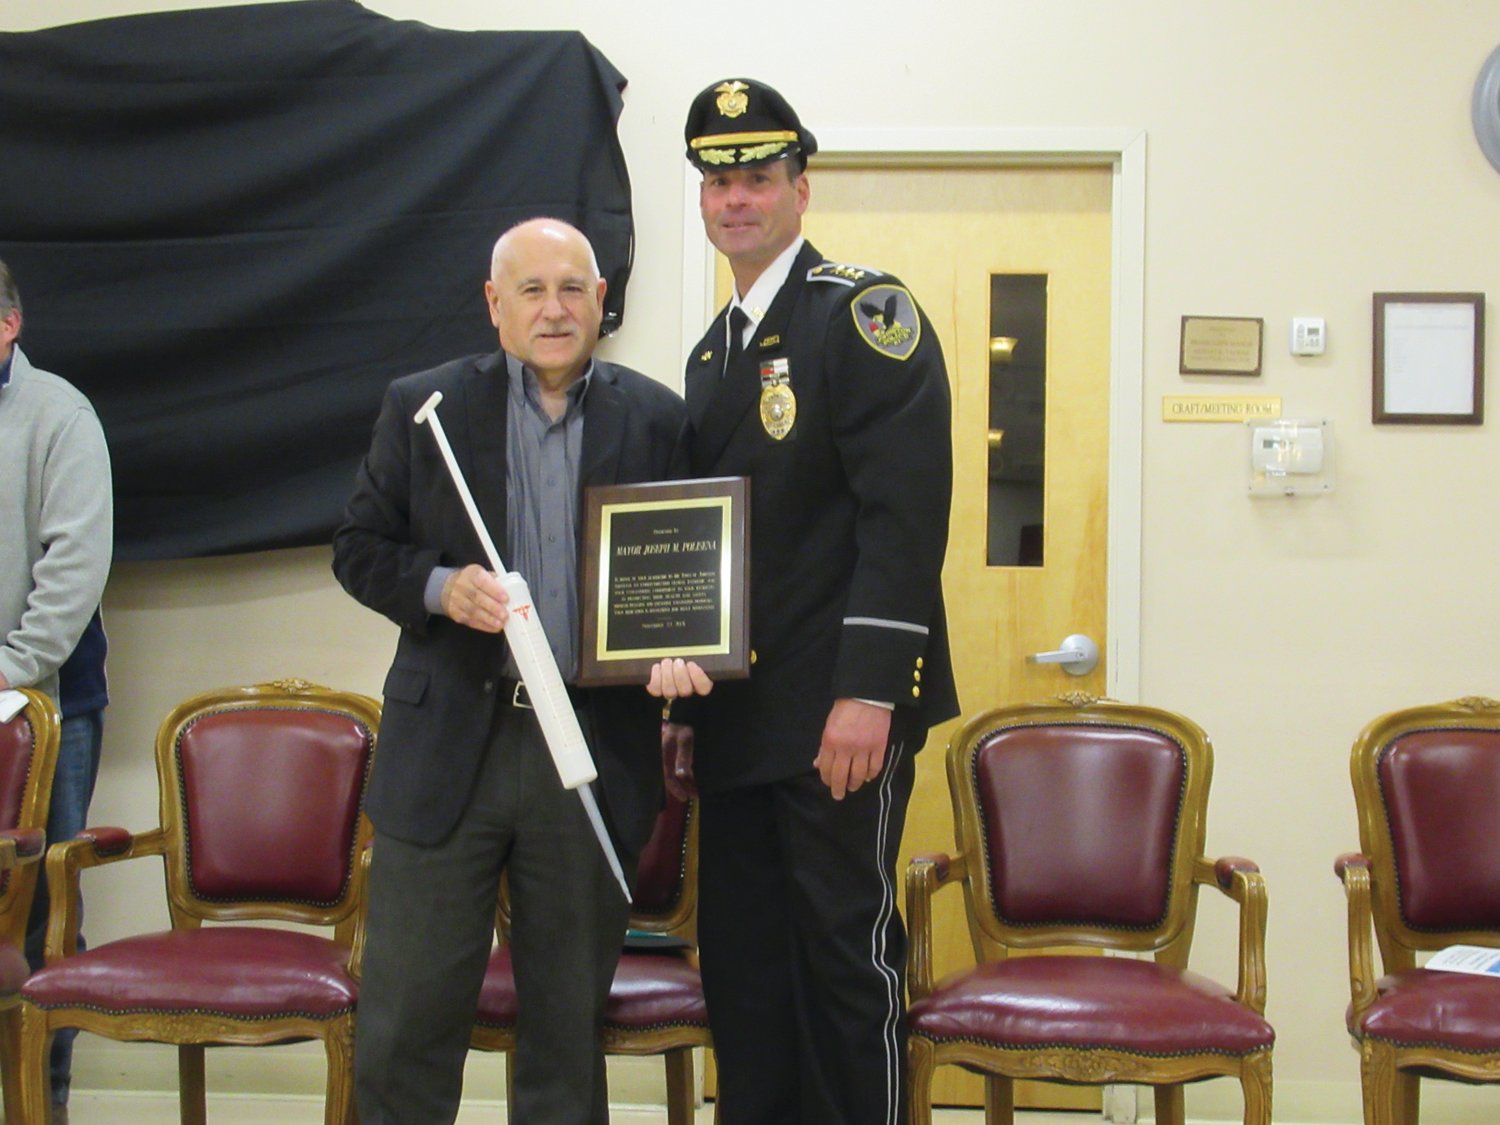 SPECIAL SURPRISE: JPD Chief Joseph P. Razza presented a giant-size syringe to Mayor Joseph Polisena for saying “YES” to having the town, police and fire department host recent and highly-successful COVID-19 Vaccination Clinics.